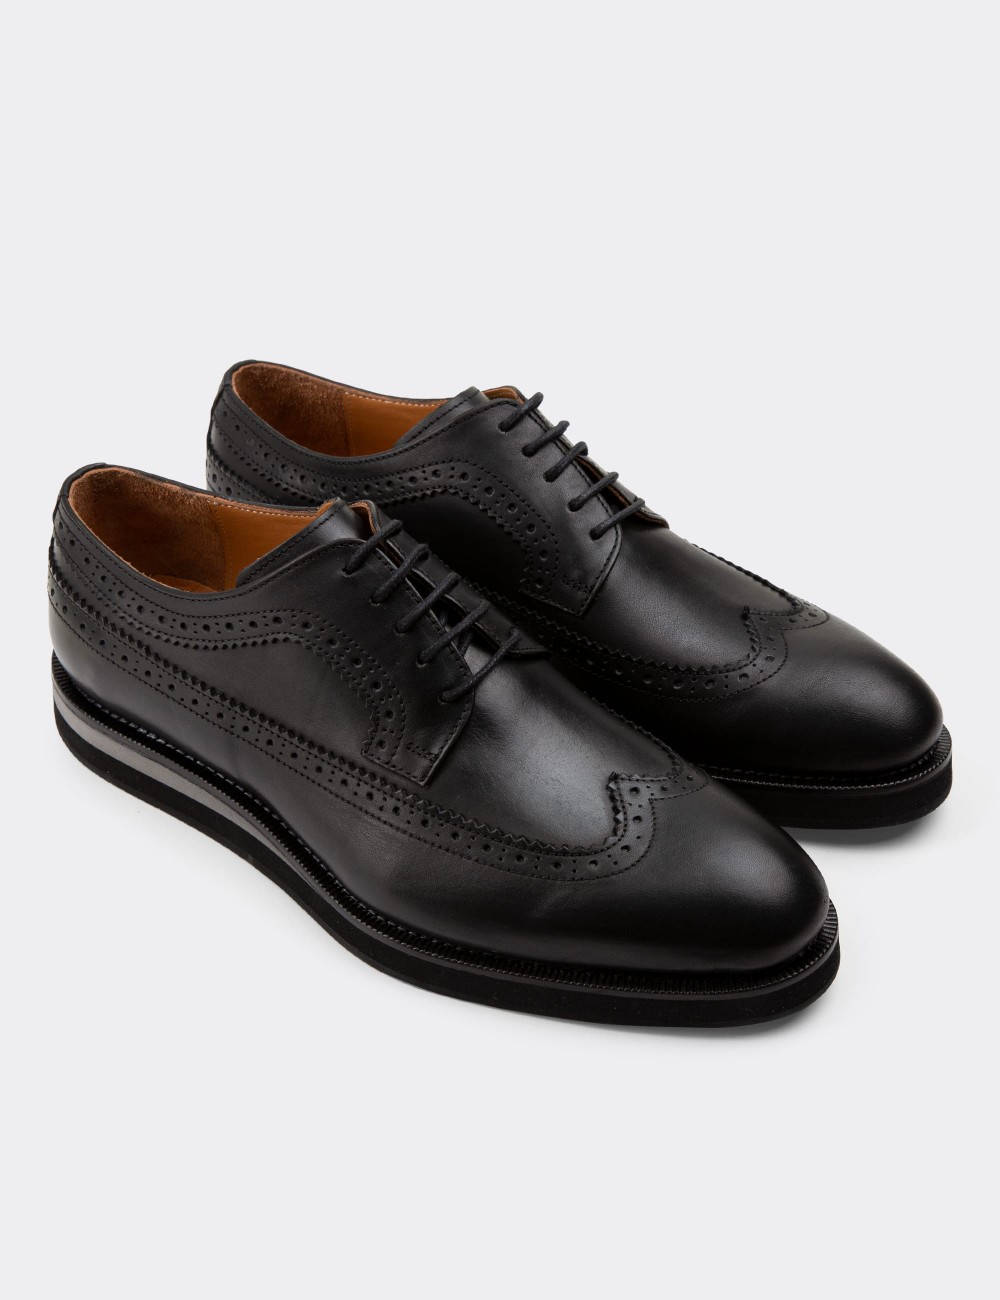 Black  Leather Lace-up Shoes - 01293MSYHE41